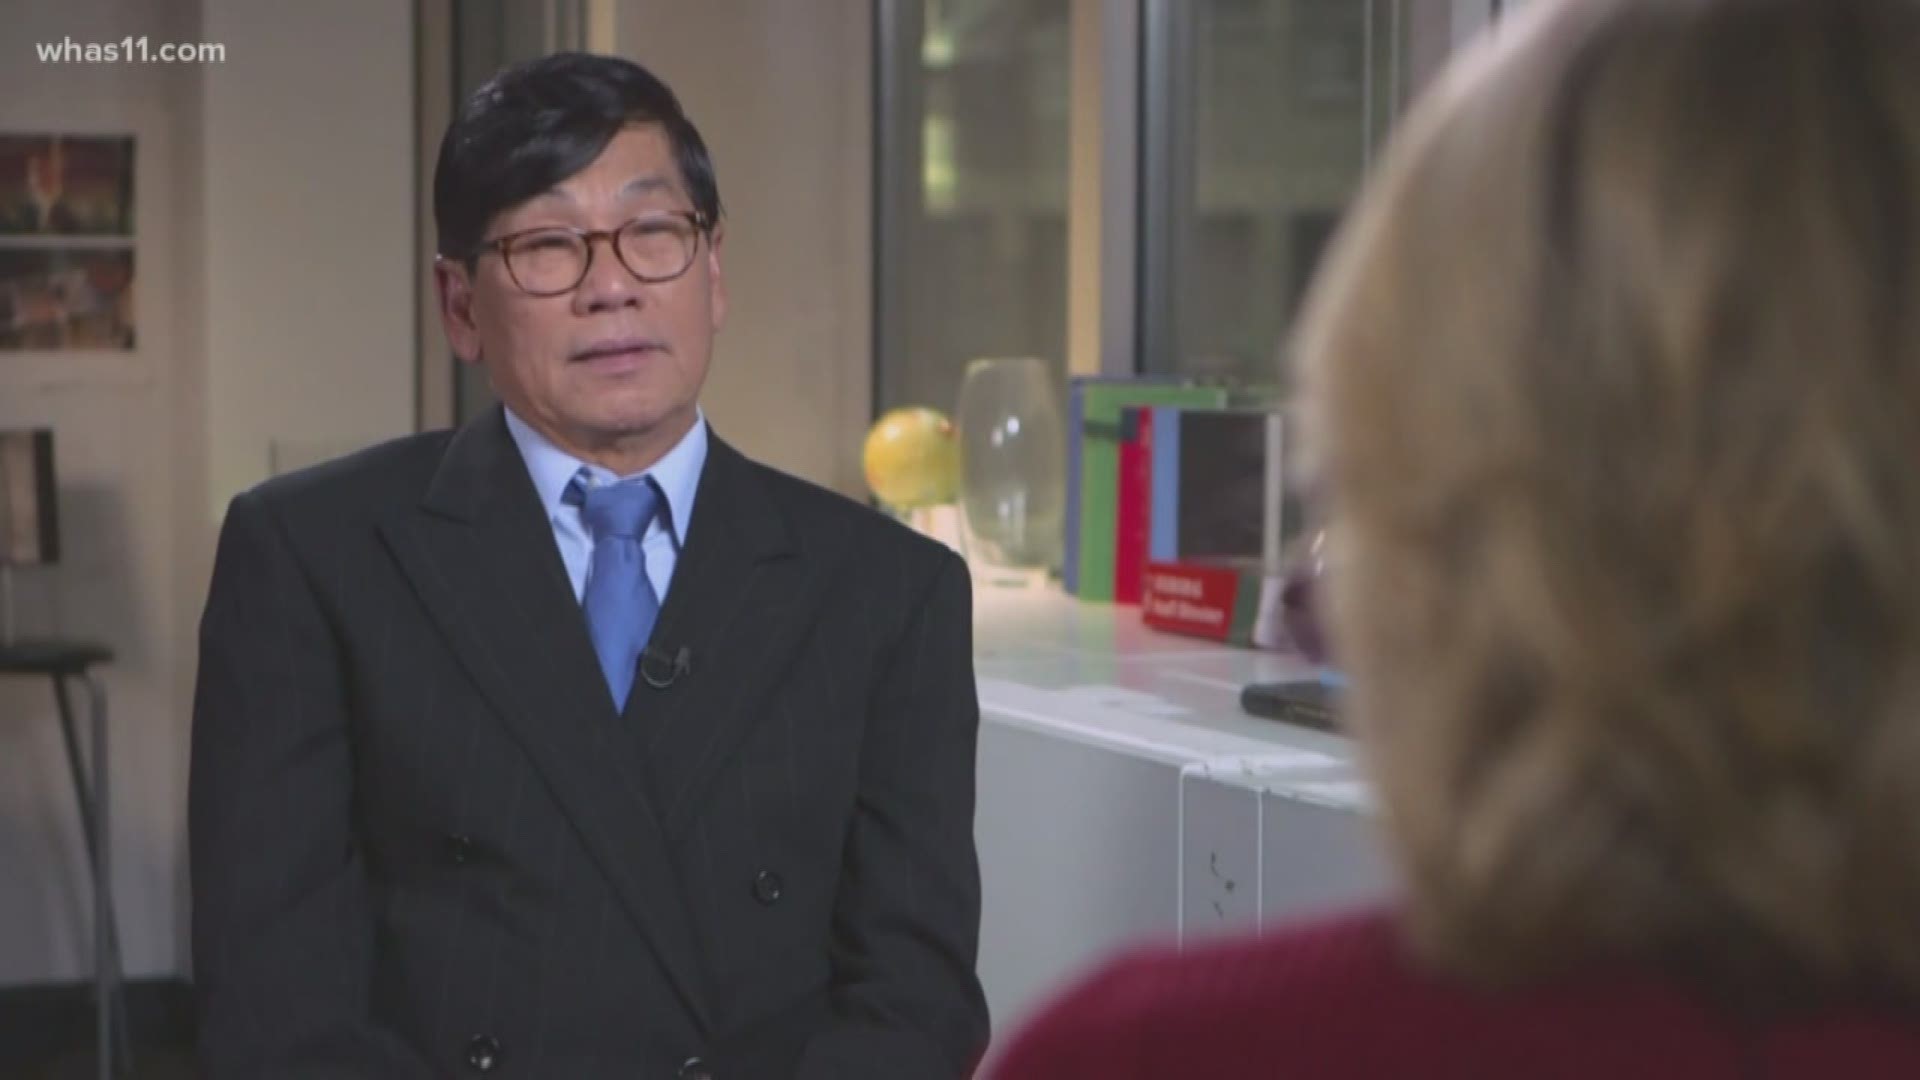 Doctor David Dao was on a plane headed from Chicago to Louisville when flight attendants asked him to leave to make room for a crew member.